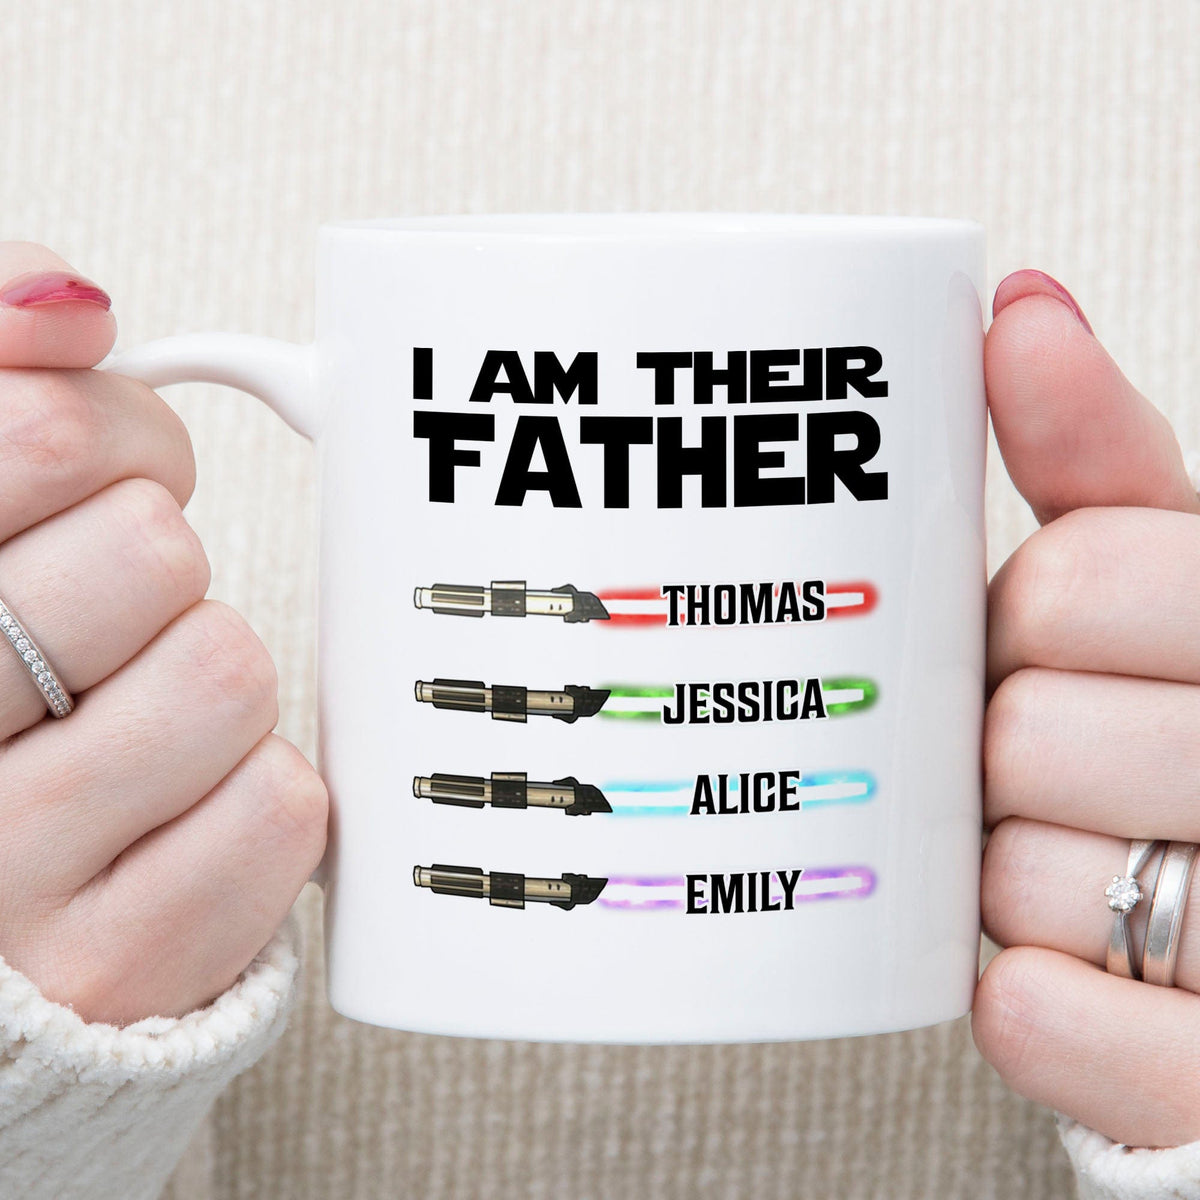 Personalized Mug For Father's Day